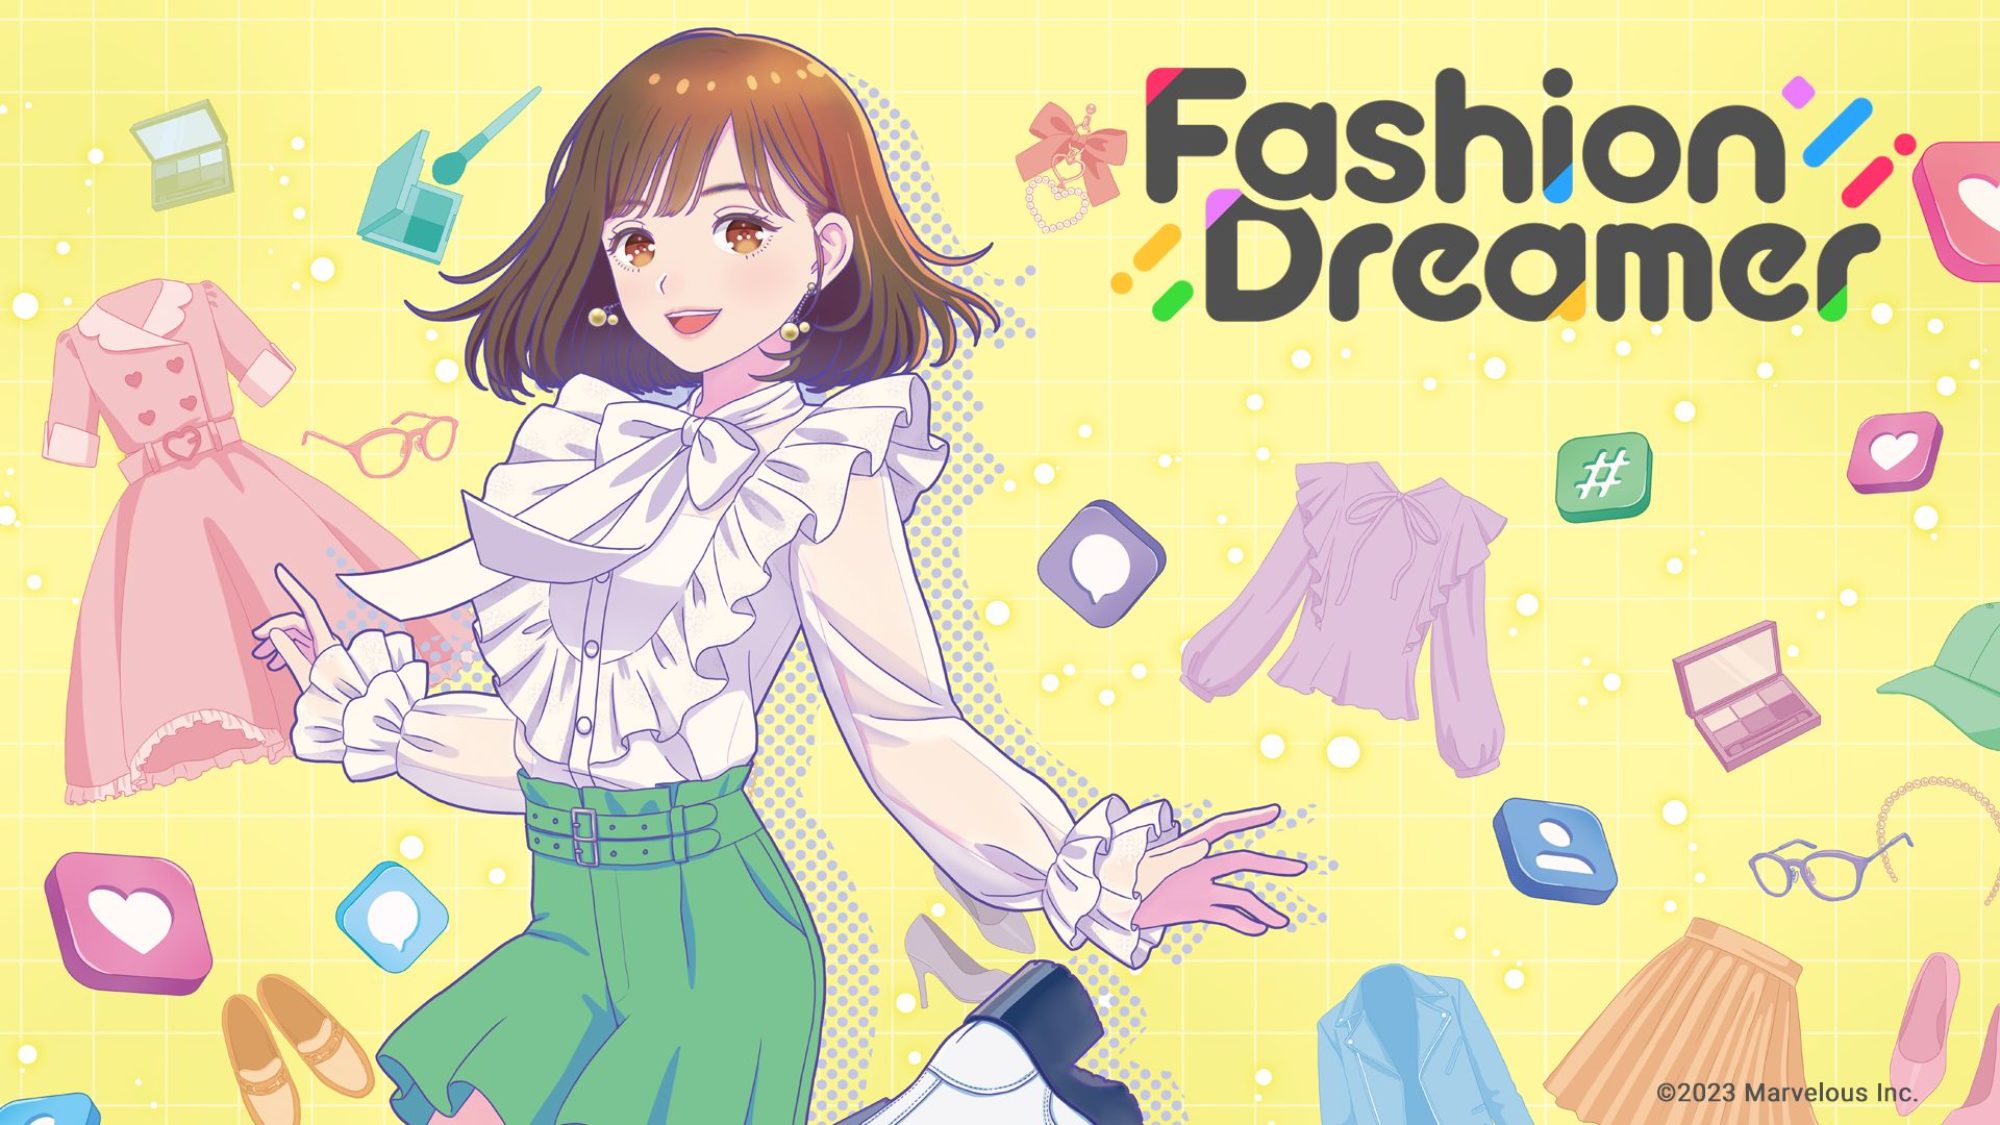 Fashion Dreamer Winter Update Launches on December 4